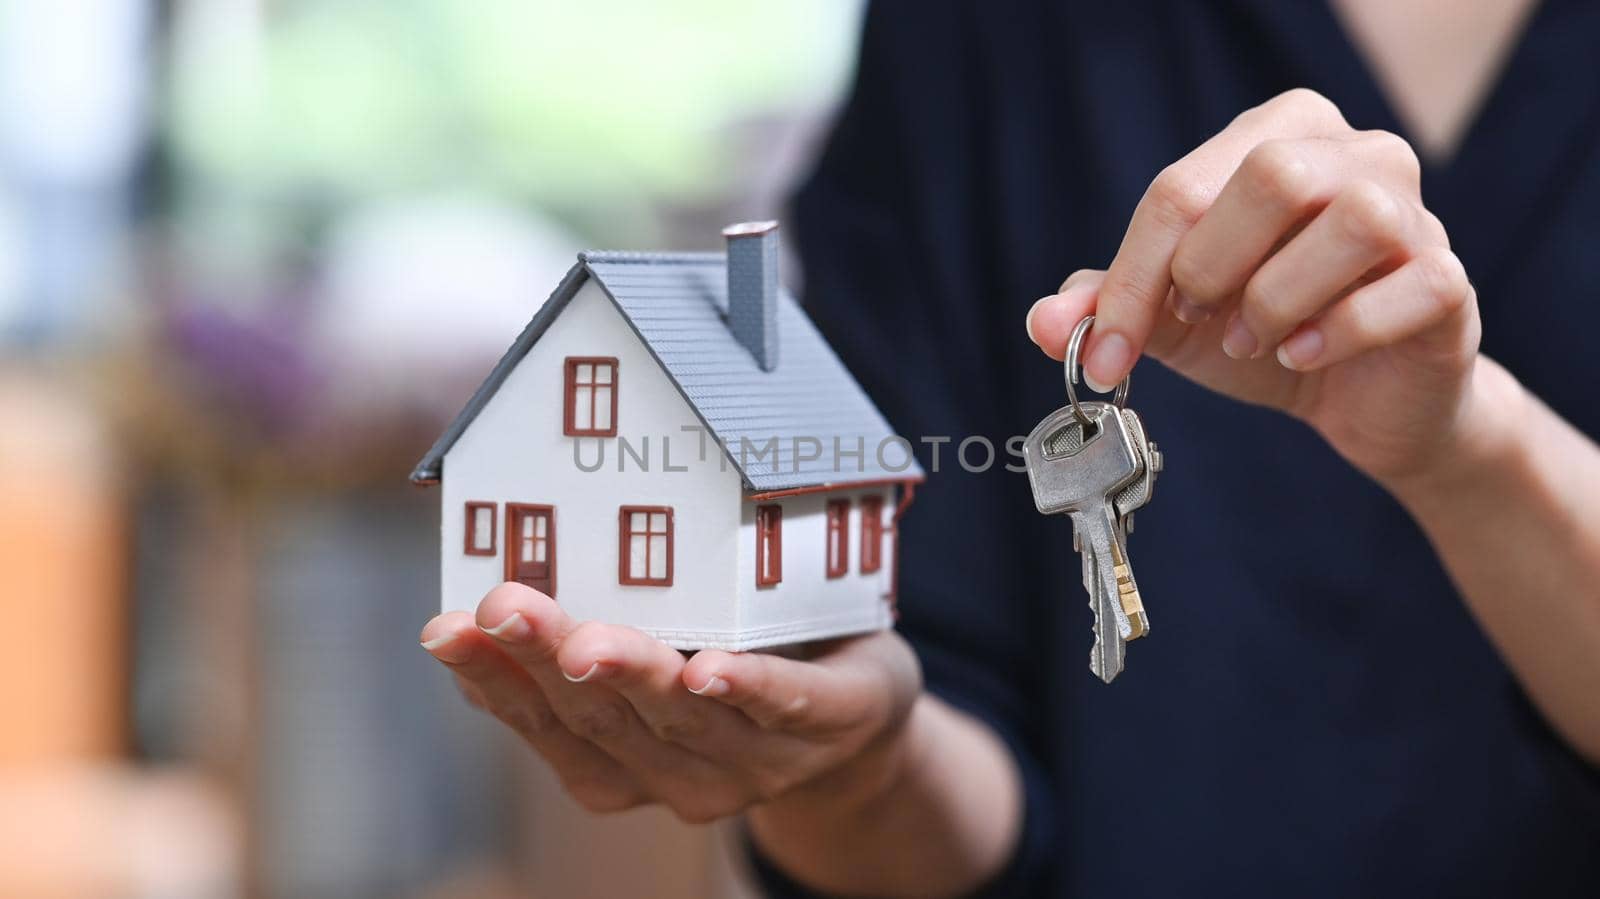 Real estate agent or financial advisor holding small house model and keys. Real estate investors, purchase and mortgage concept by prathanchorruangsak